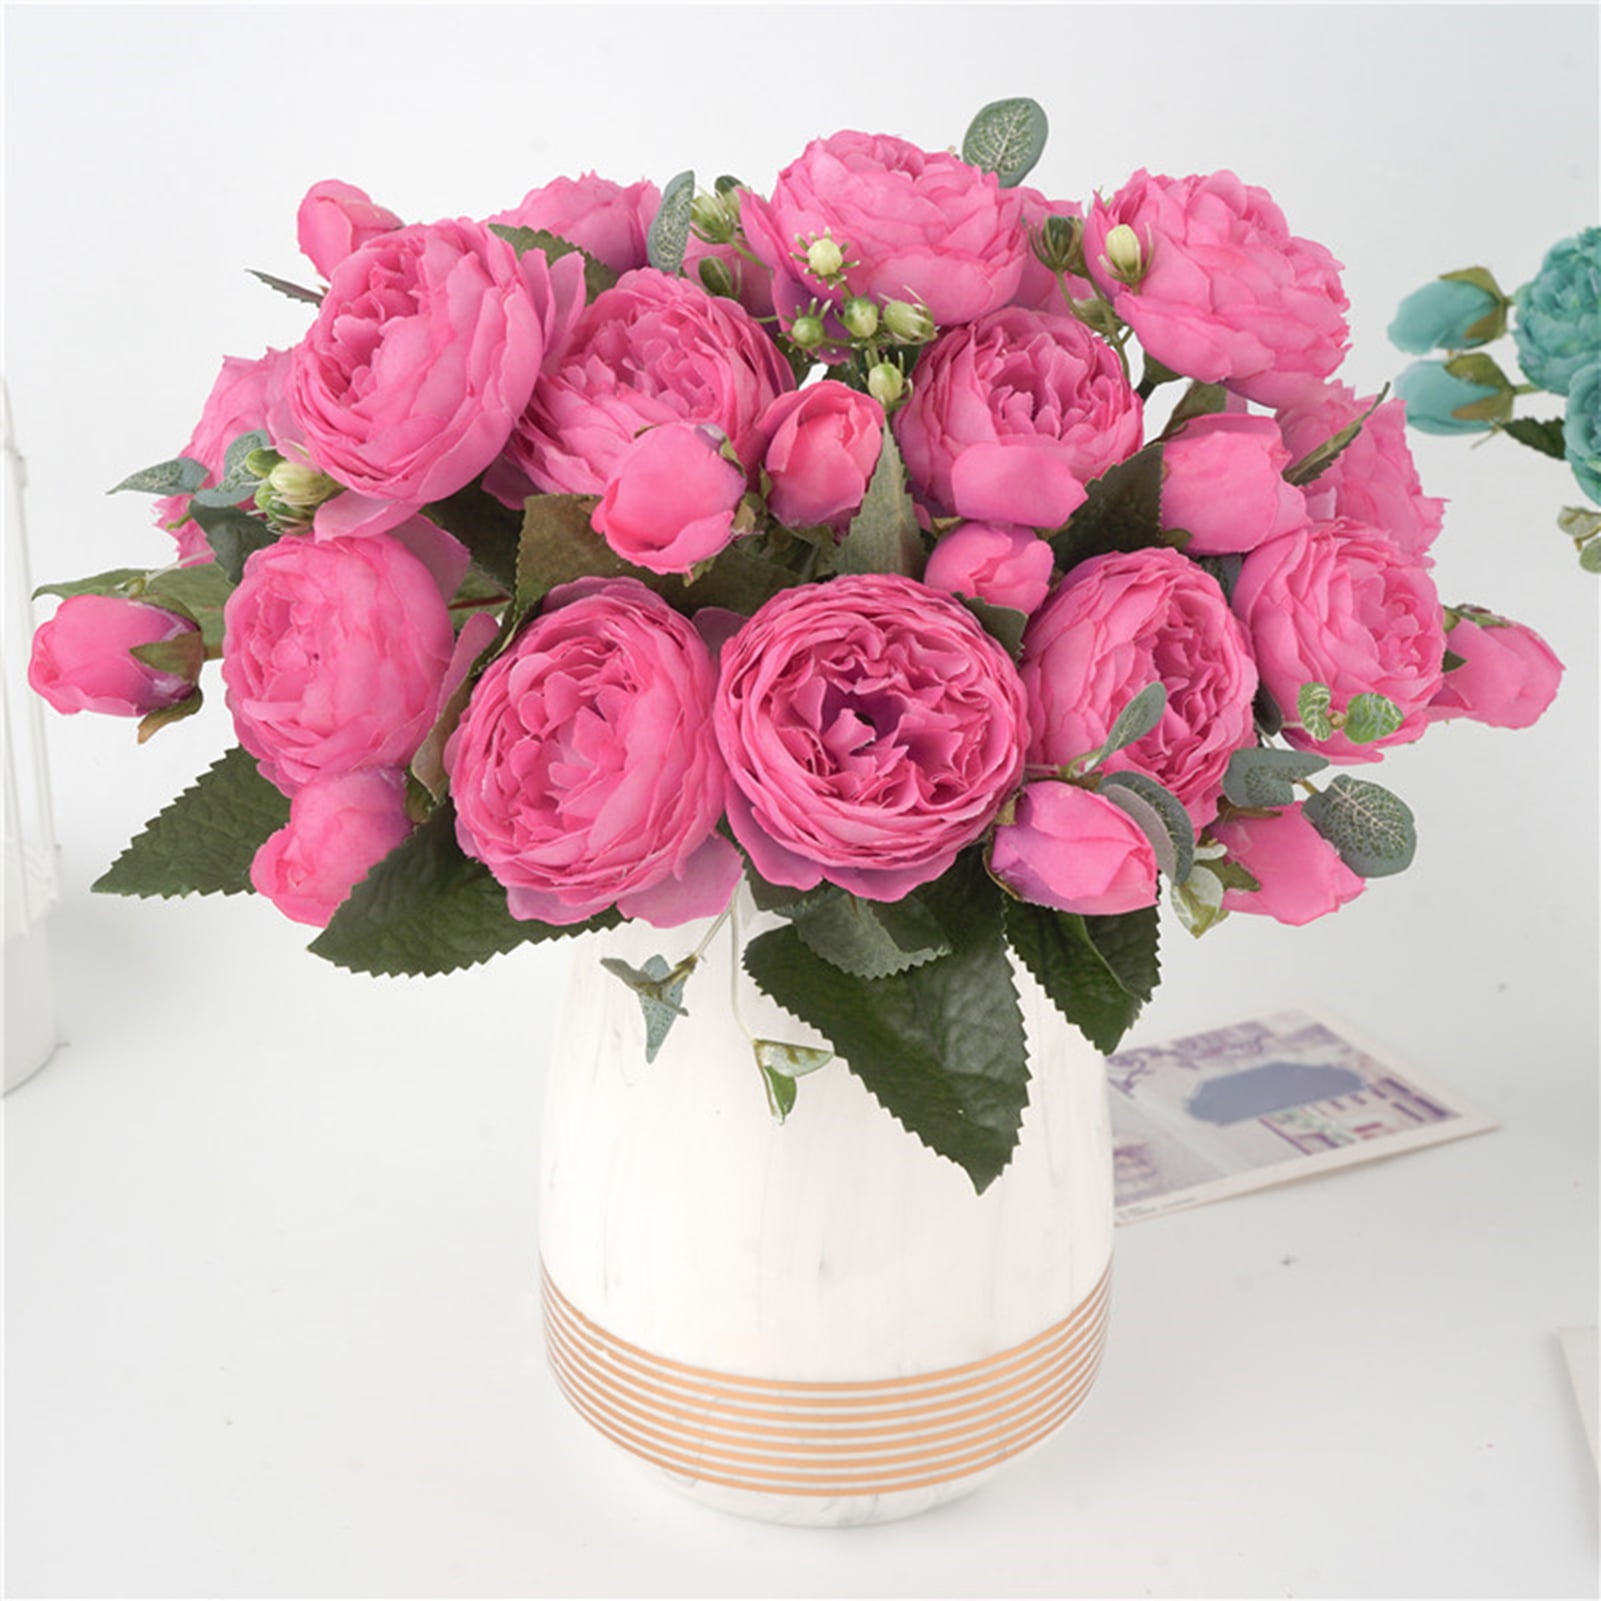 5 Heads Rose Peony Artificial Flowers Silk Pink Bouquet Wedding Home Party Decor